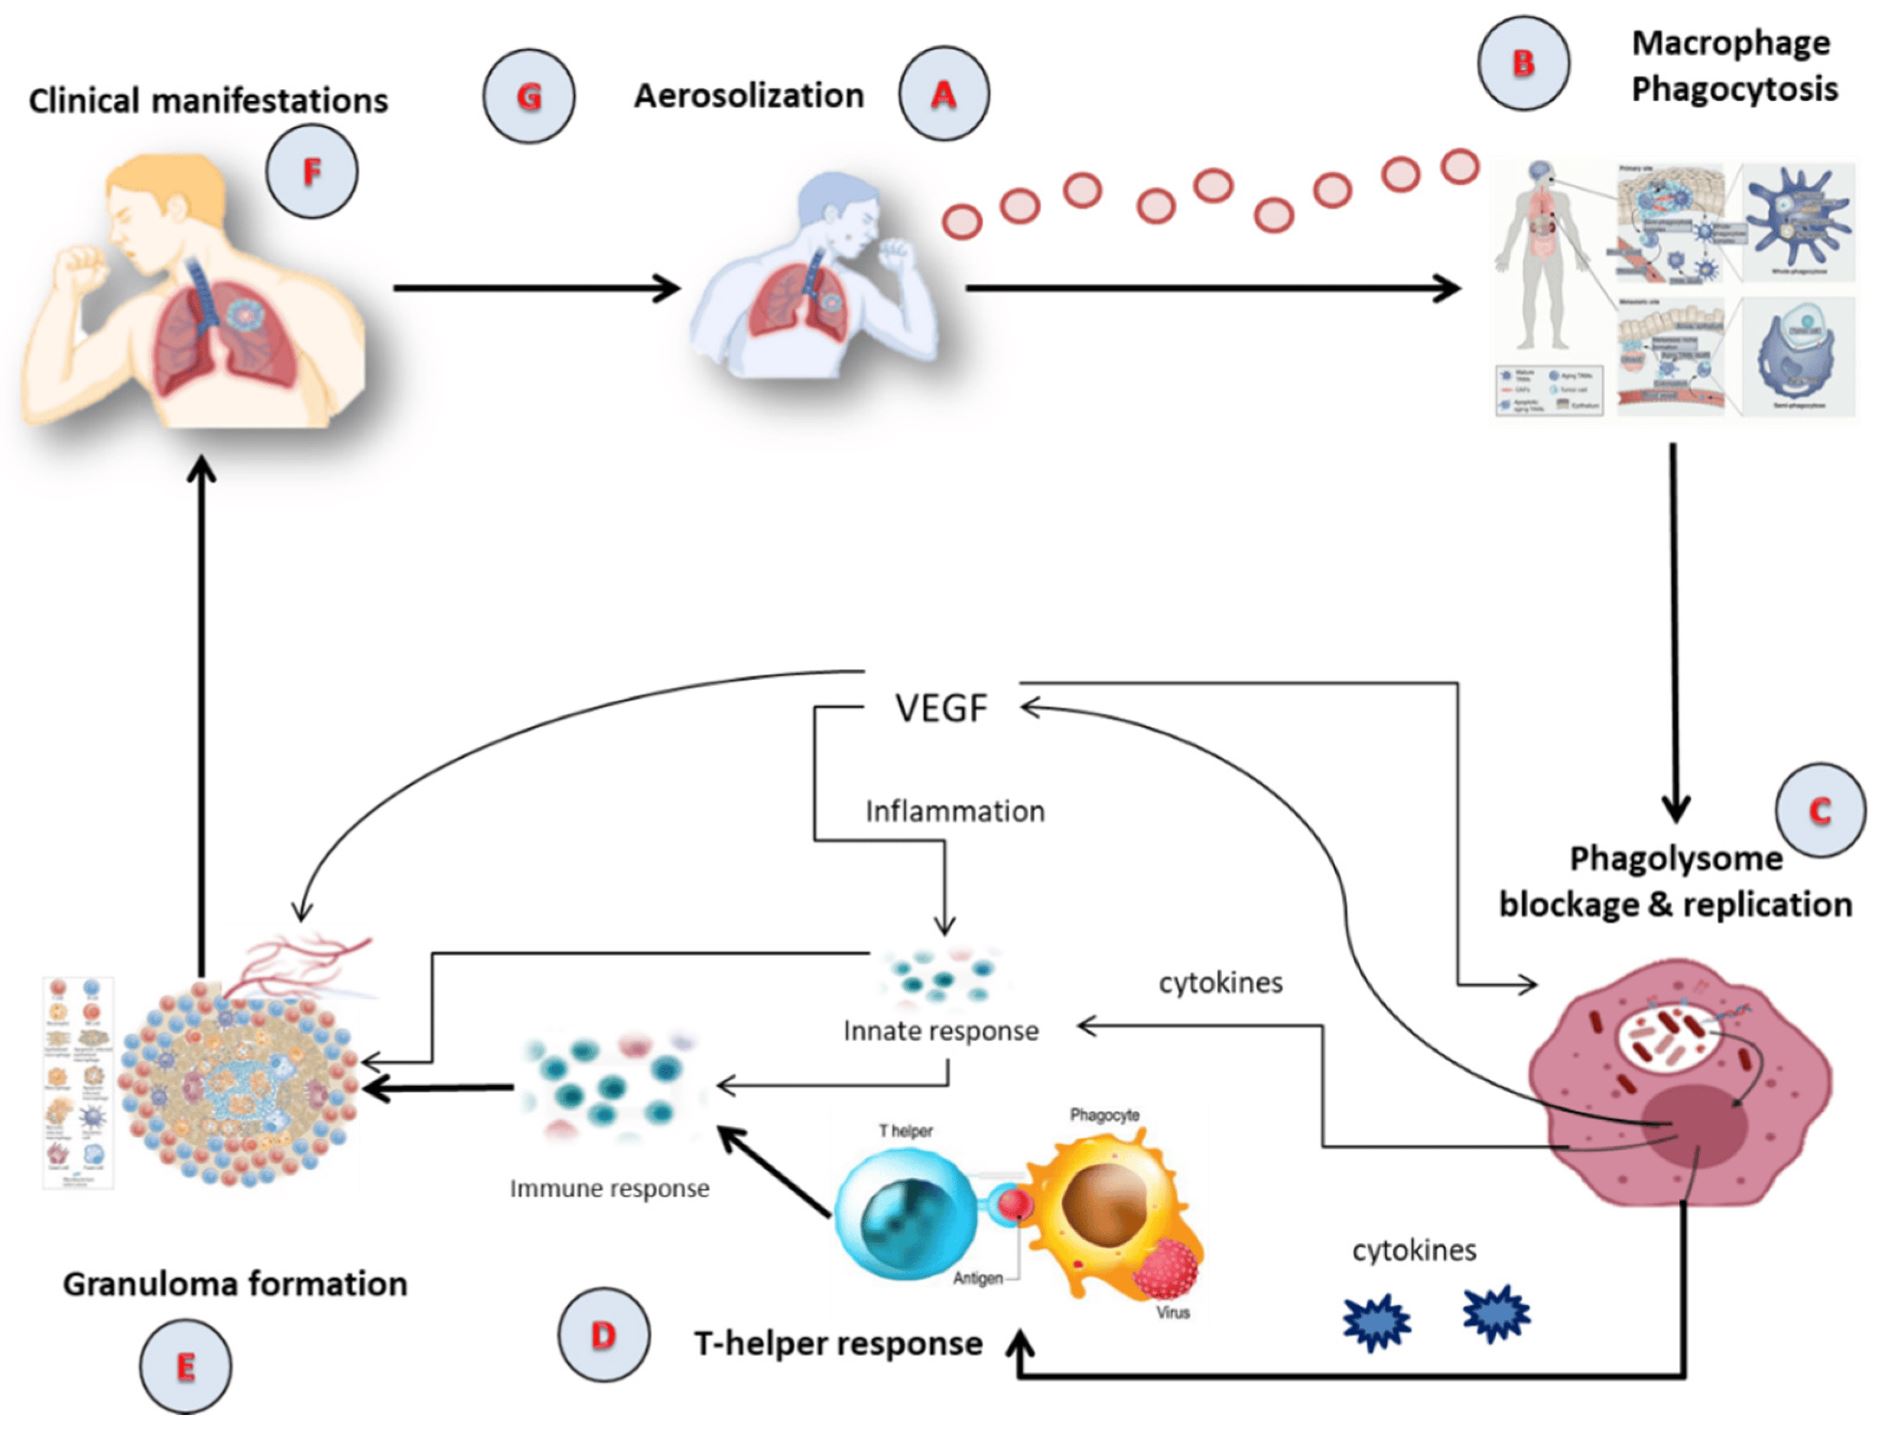 Nanocarriers in Tuberculosis Treatment: Challenges and Delivery Strategies